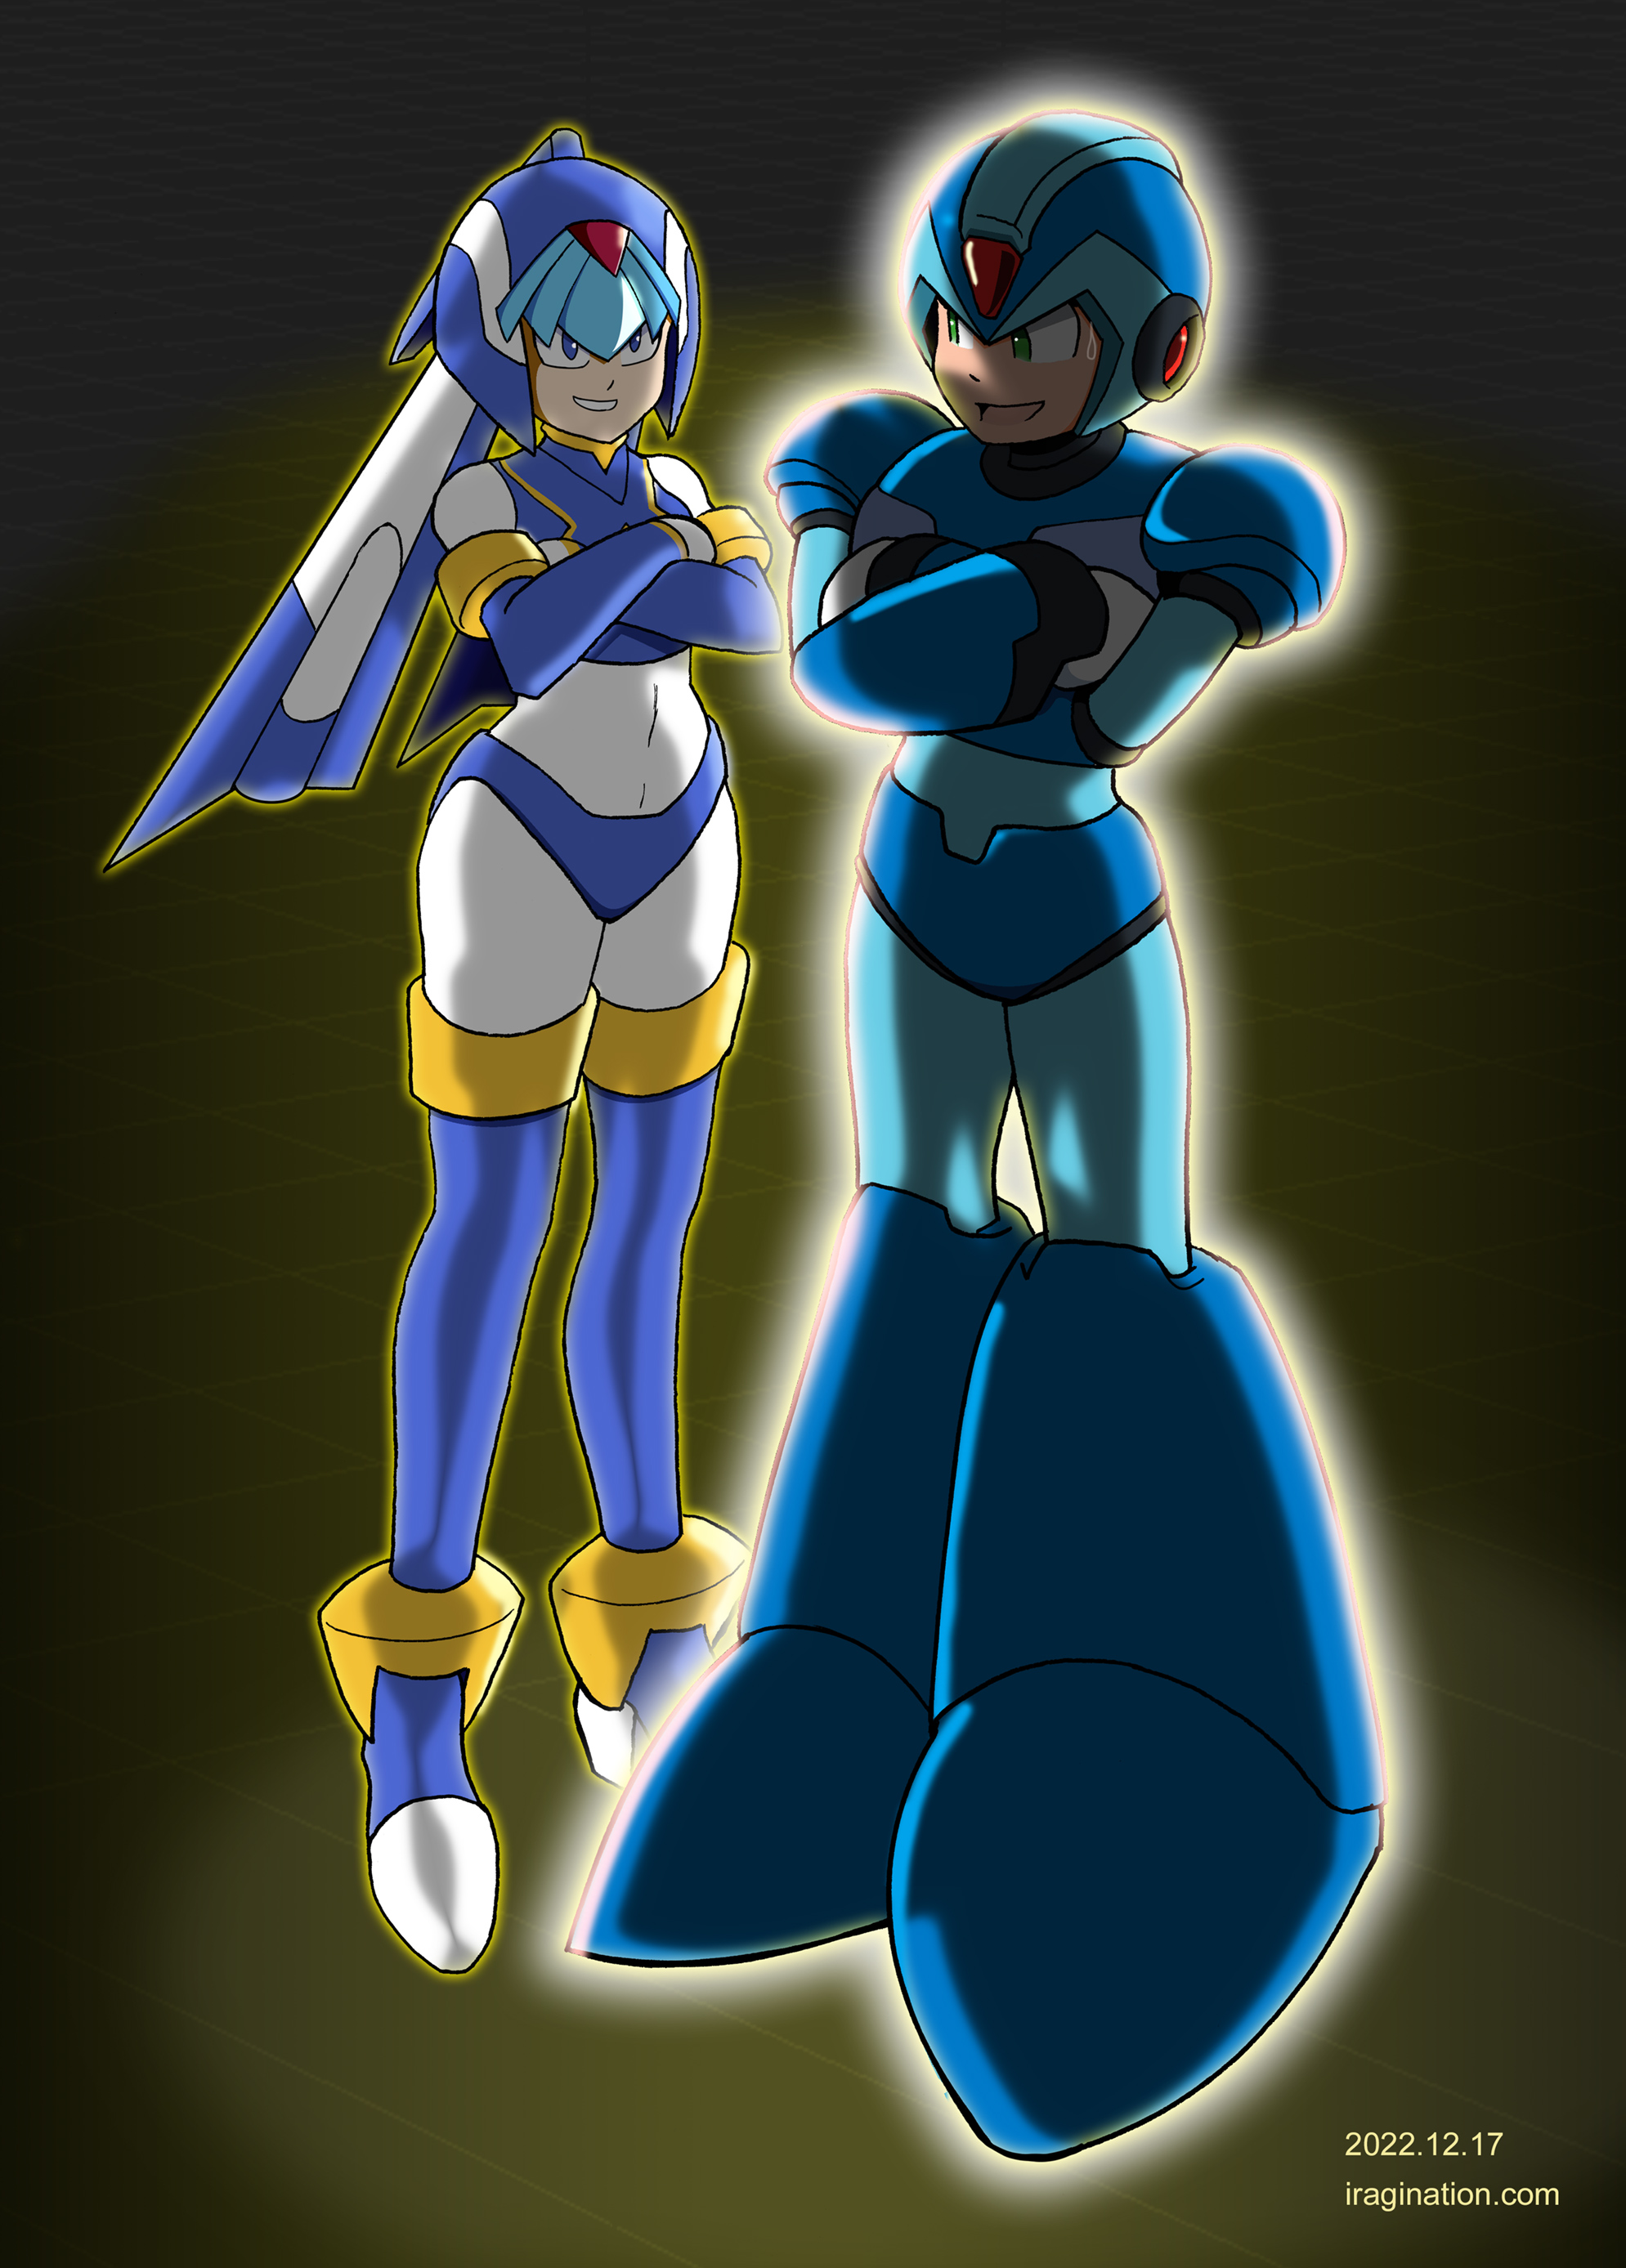 Leviathan and S-Class Hunter X
I’ve wanted to draw a picture of [b]Leviathan[/b] and [b]X[/b] together, and this seemed like a good chance.

[b]Rockman X DiVE[/b] introduced [url=https://twitter.com/RX_DiVE/status/1602959079466409985]S-Class Hunter X[/url] as a new Hunter Program for this year’s Rockman X anniversary, celebrated on 12/17. There’s not much to say in terms of lore, but at least the design is simple enough, so I could complete this rather quickly.

I imagined [b]Leviathan[/b] taking notice of [b]X[/b]’s powered-up version and essentially not planning to be left behind in terms of power level.

Mega Man X DiVE © CAPCOM
Keywords: leviathan x